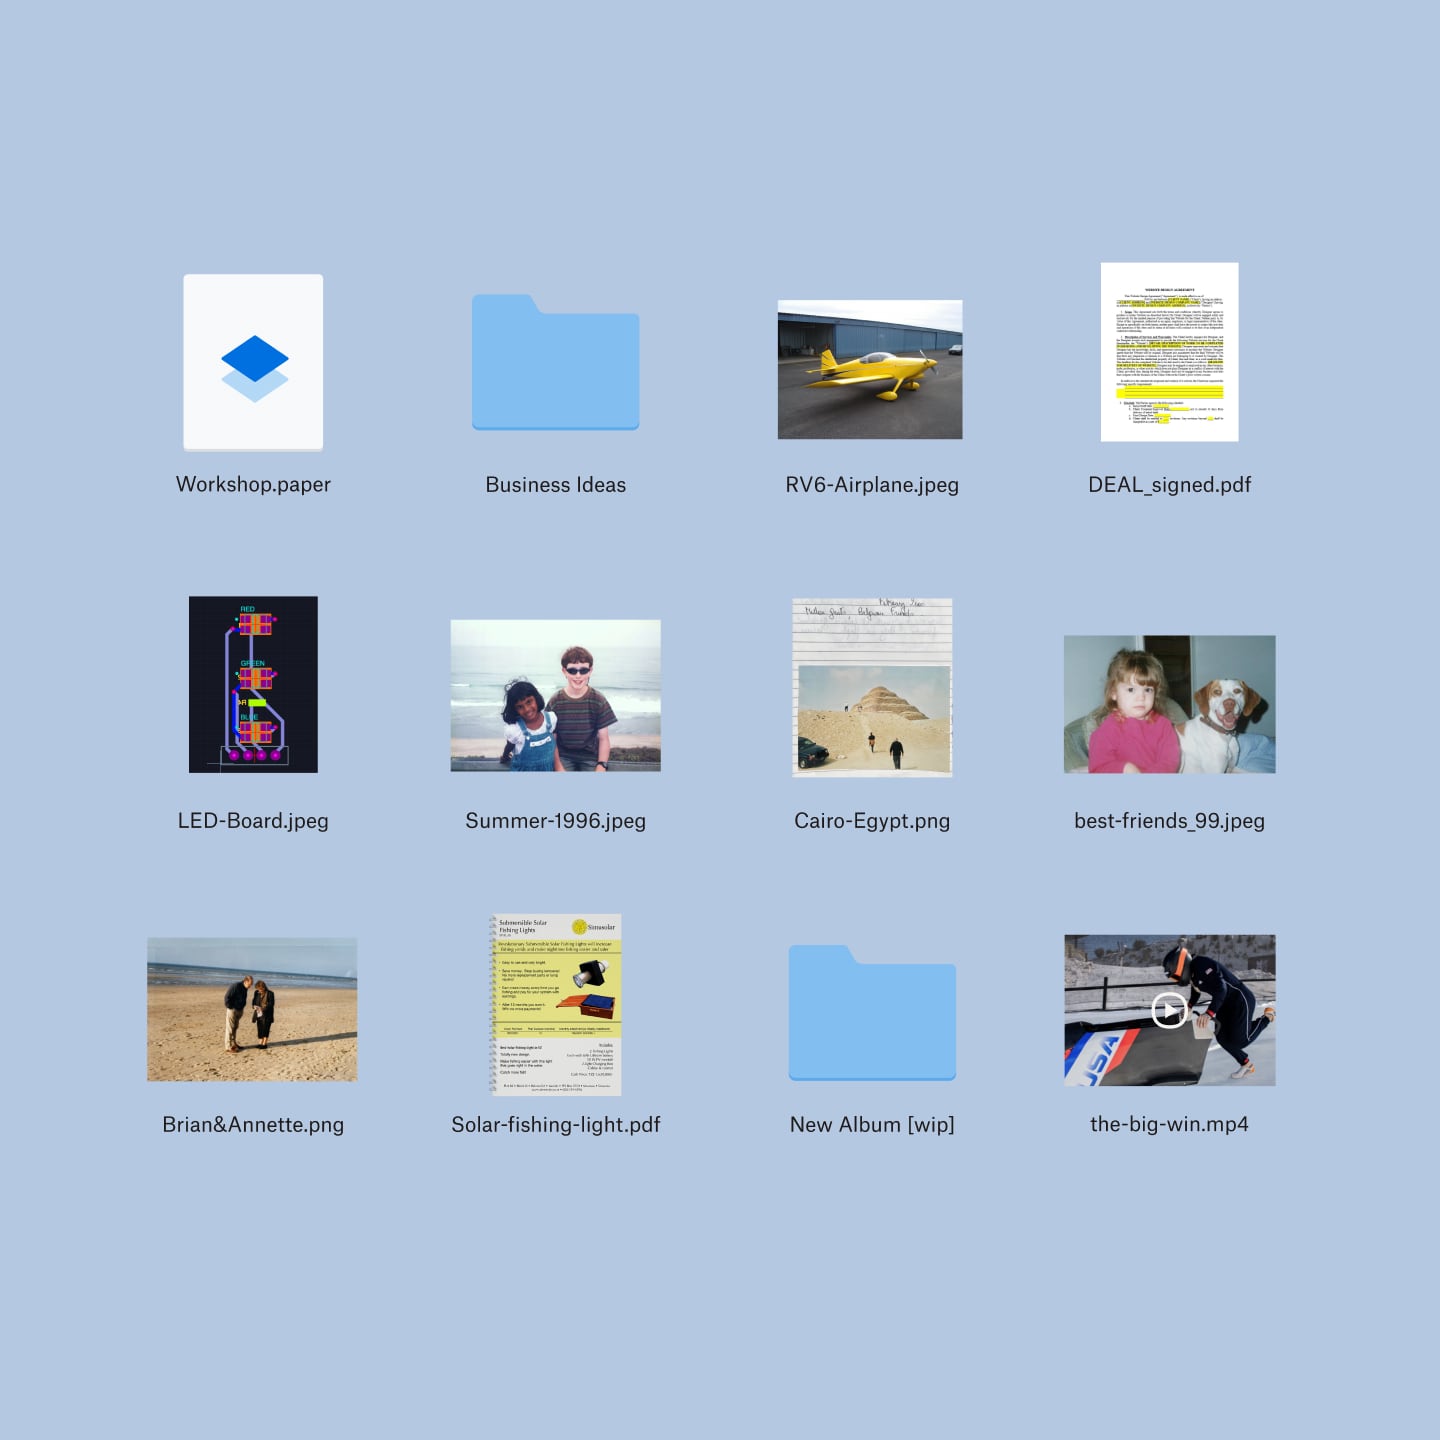 Twelve files and folders in Dropbox, which include images, business ideas, and photo albums.